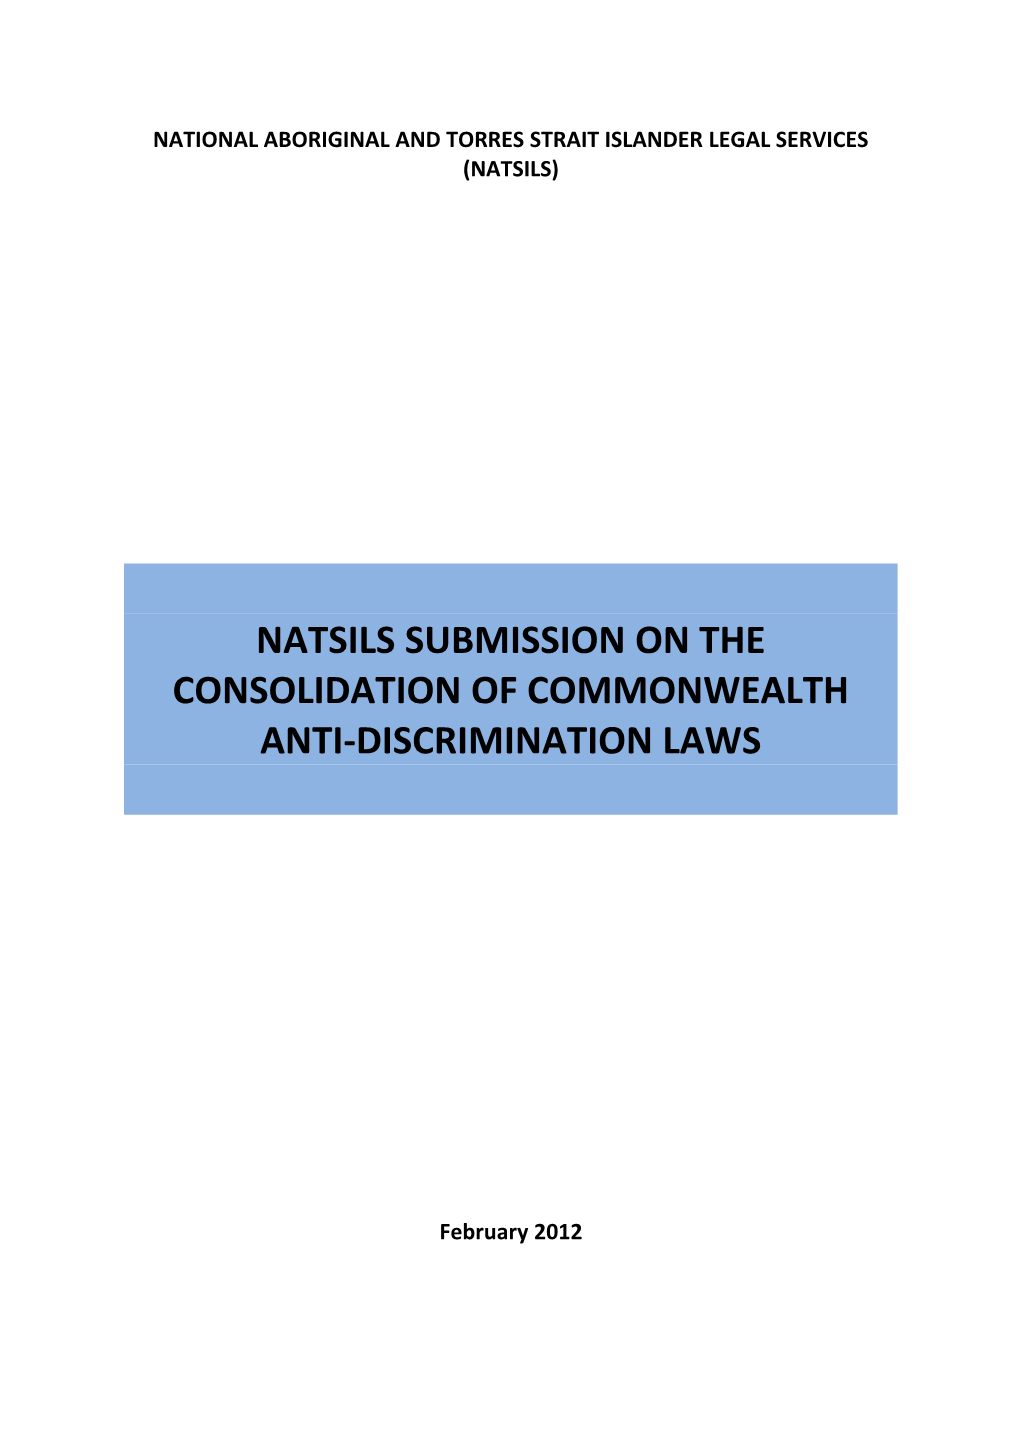 Submission on the Consolidation of Commonwealth Anti-Discrimination Laws - ATSILS